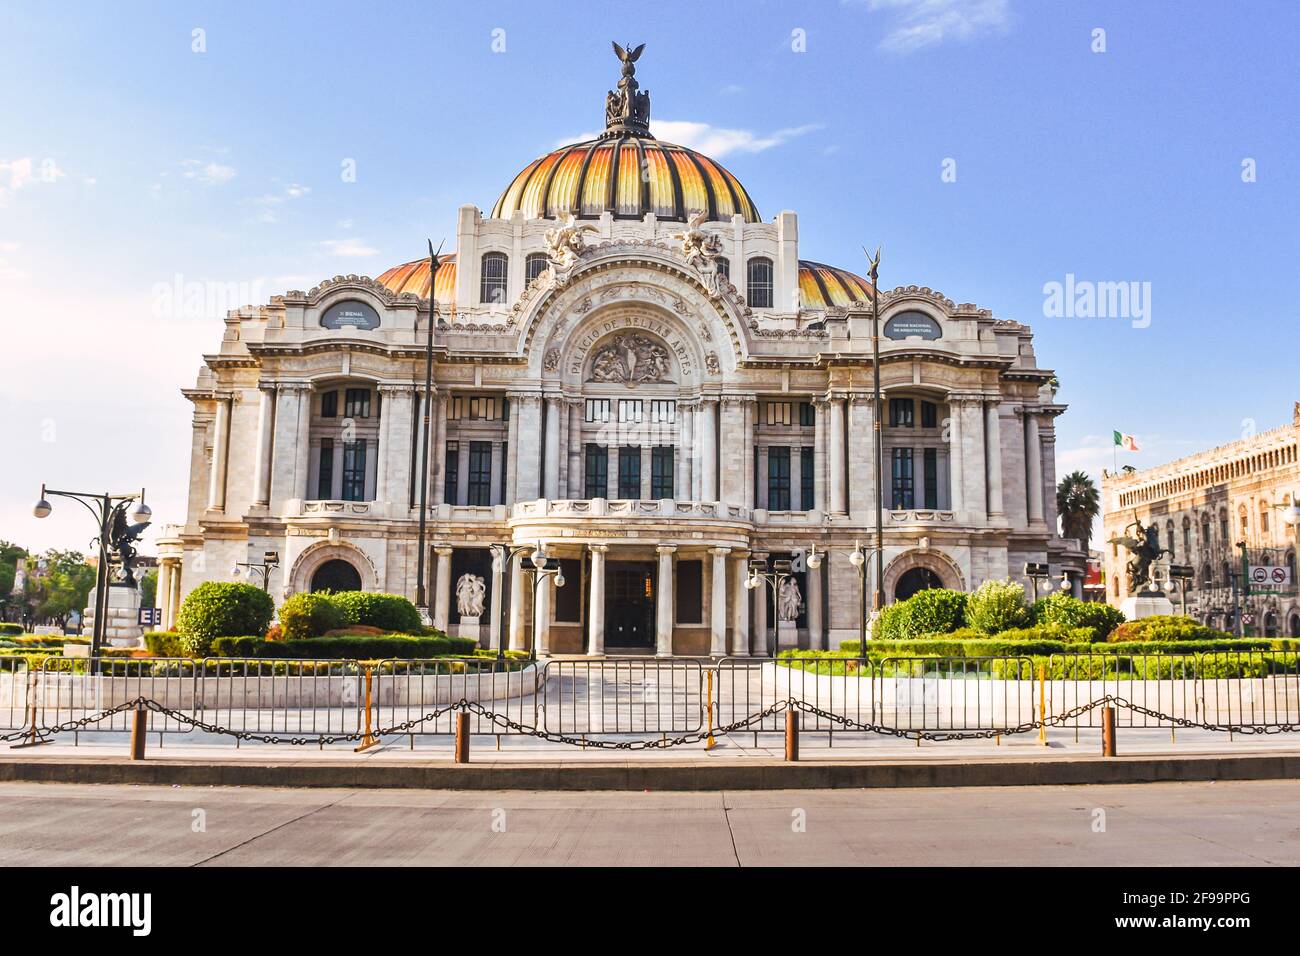 view of the Palacio de Bellas Artes or Palace of Fine Arts, a famous theater, museum and music venue in Mexico City closed during the coronavirus outb Stock Photo